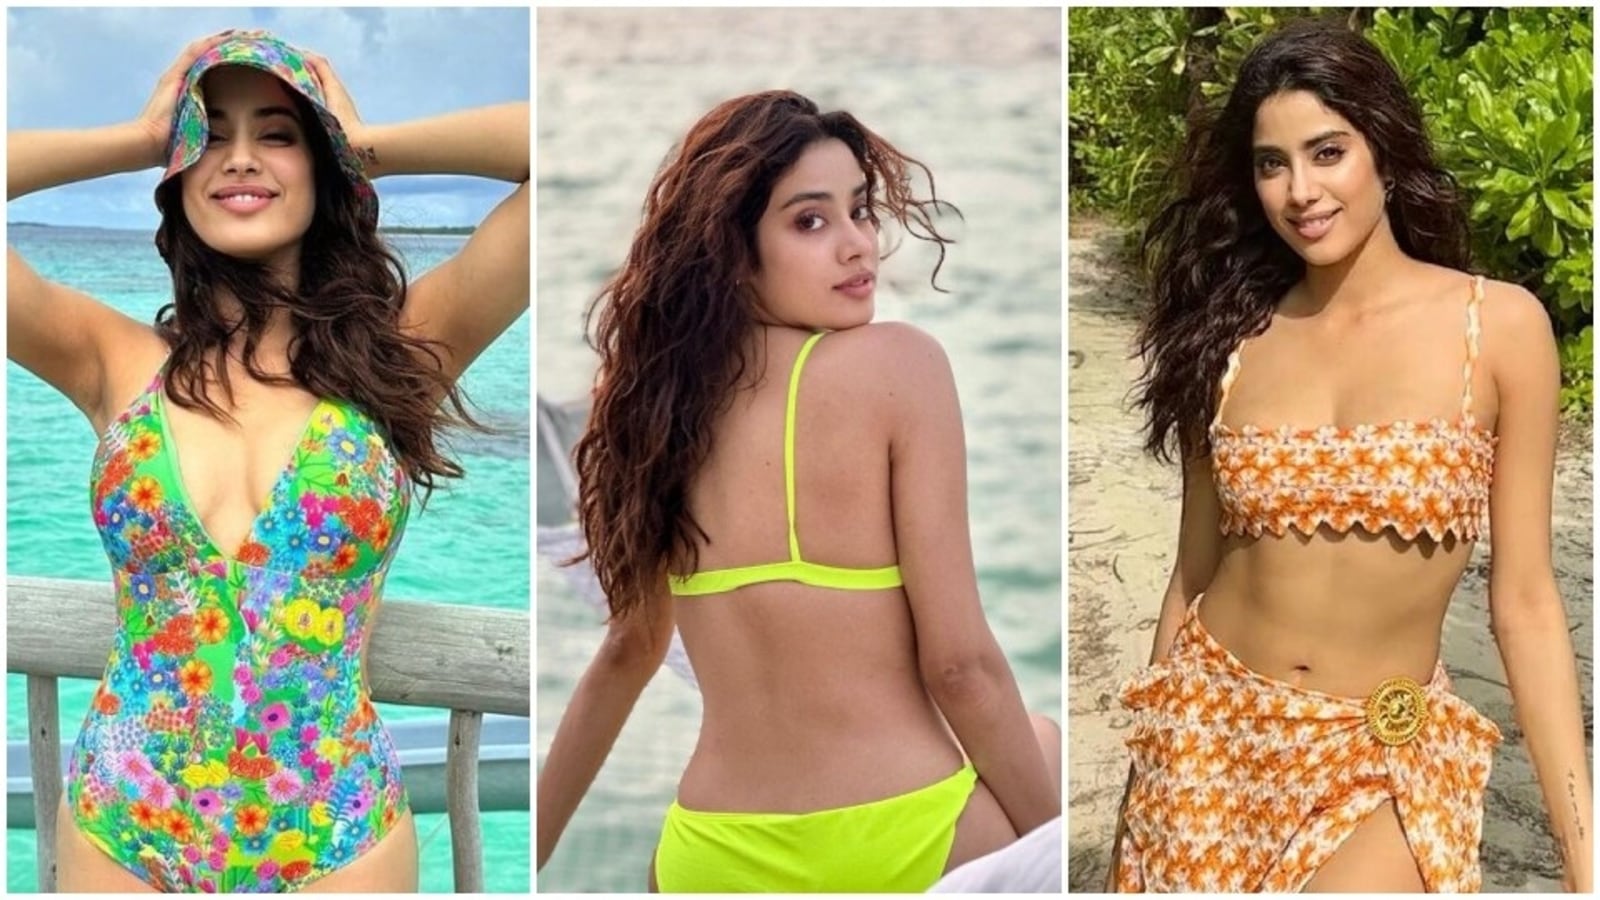 Krishna Kapur Xxx - Janhvi Kapoor in beach-ready swimsuits and backless dress at Maldives is  gorgeous as the clear blue sea: All pics | Fashion Trends - Hindustan Times